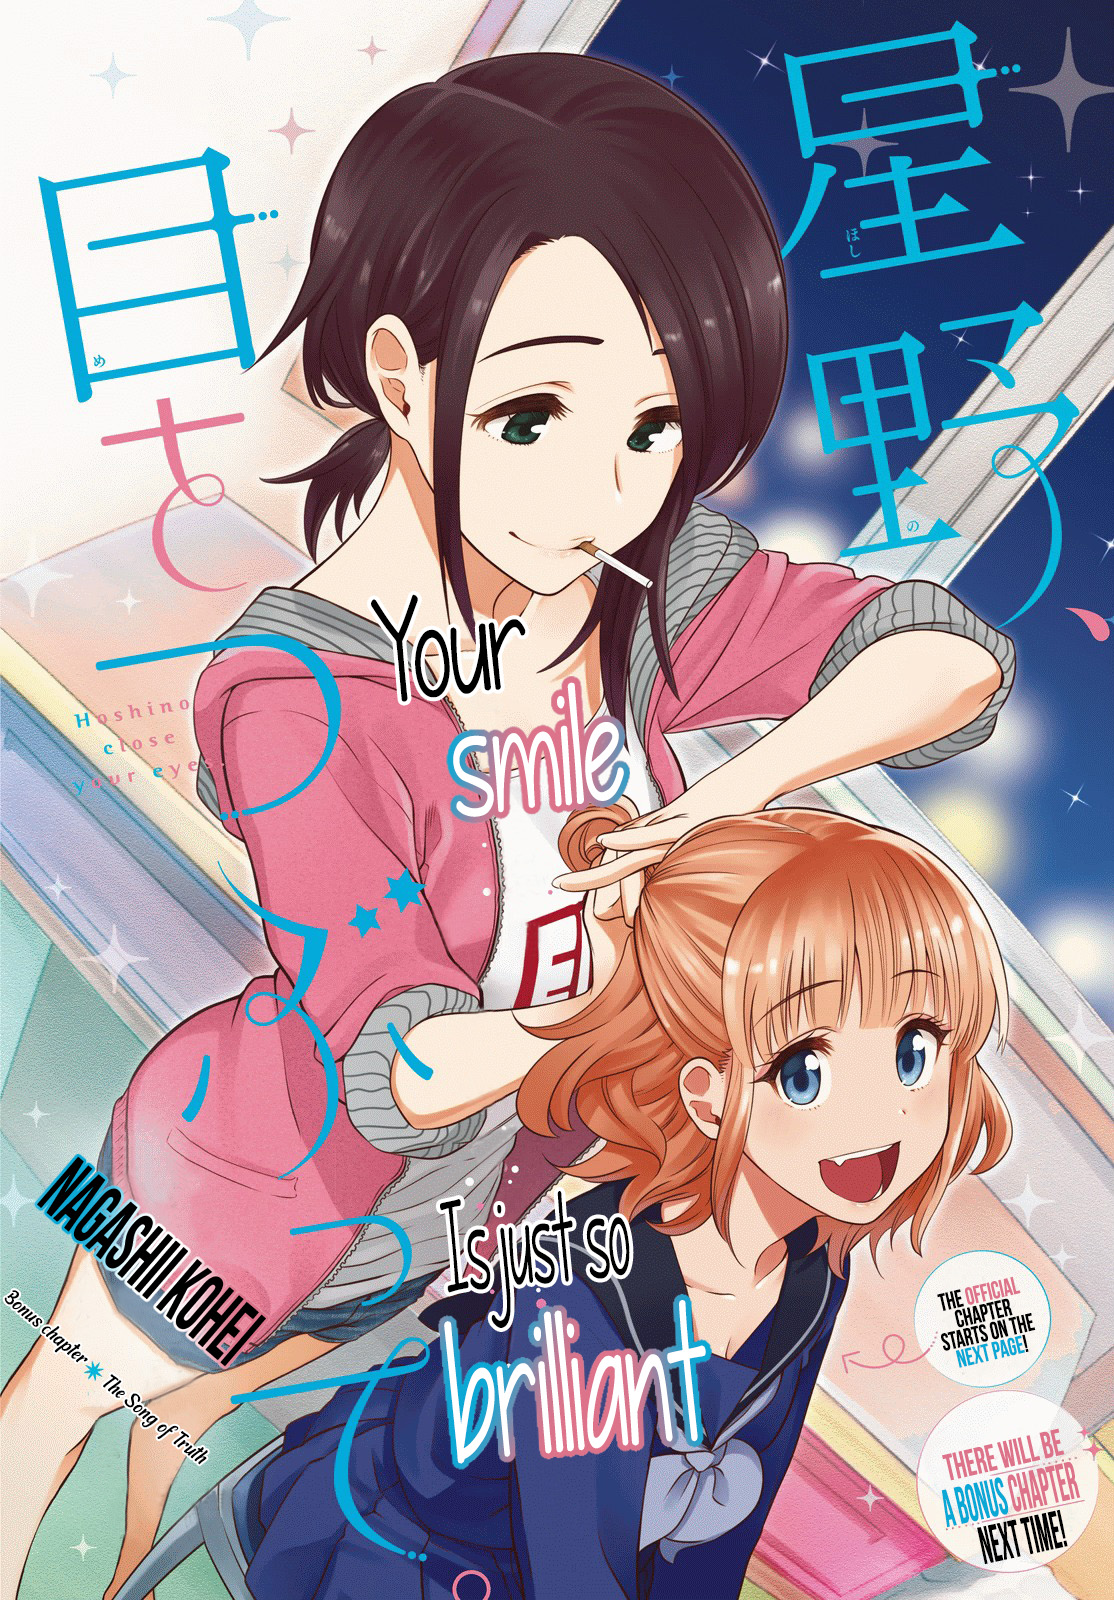 Hoshino, Me O Tsubutte Vol. 1 Ch. 6.5 The Song of Truth